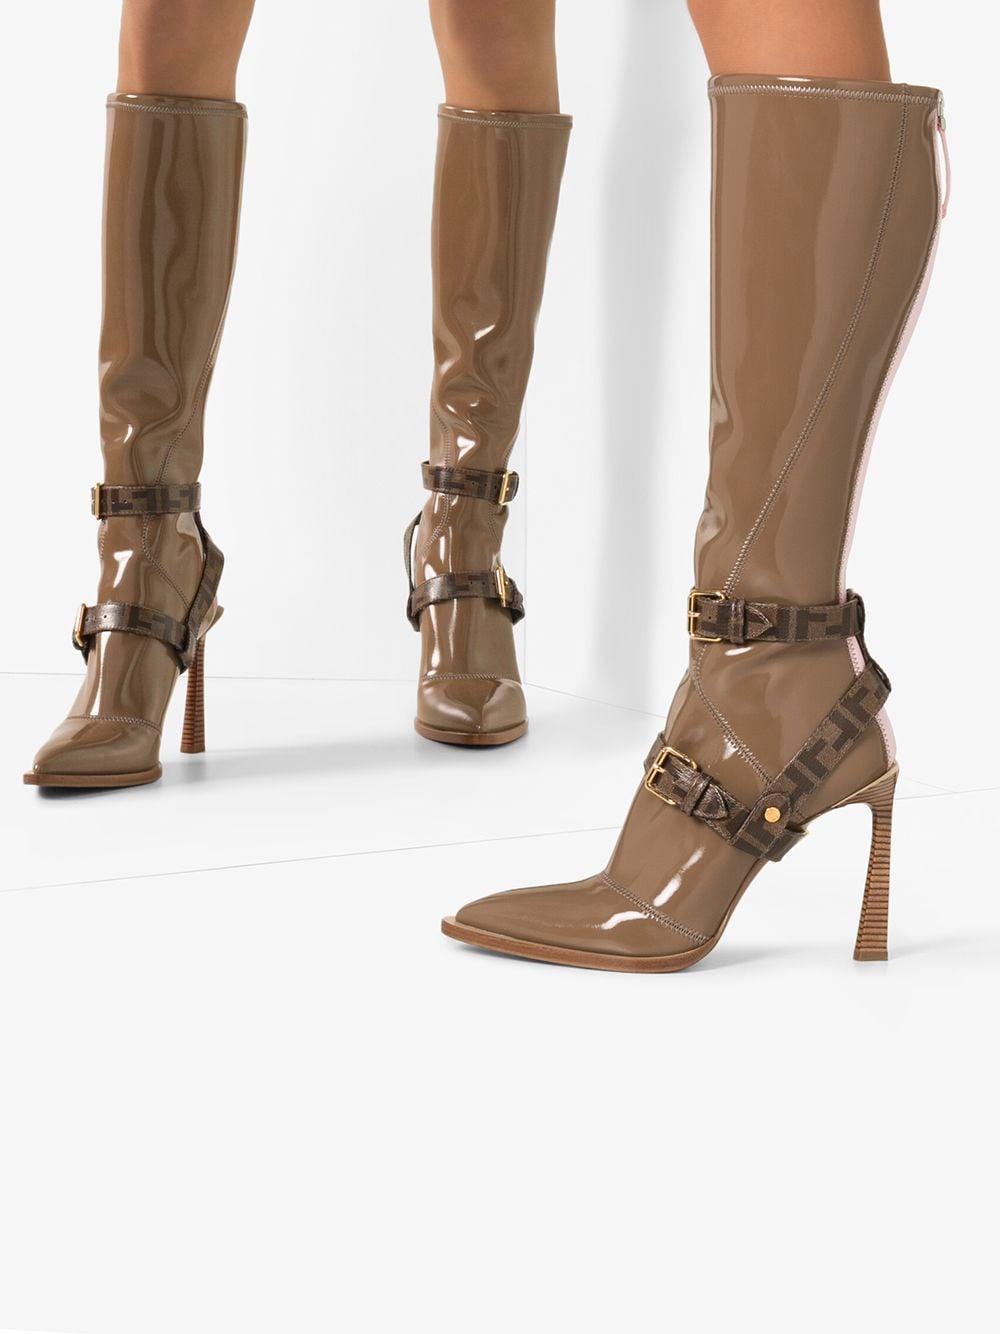 Fendi Rubber Patent 105mm Knee-high Boots in Brown | Lyst